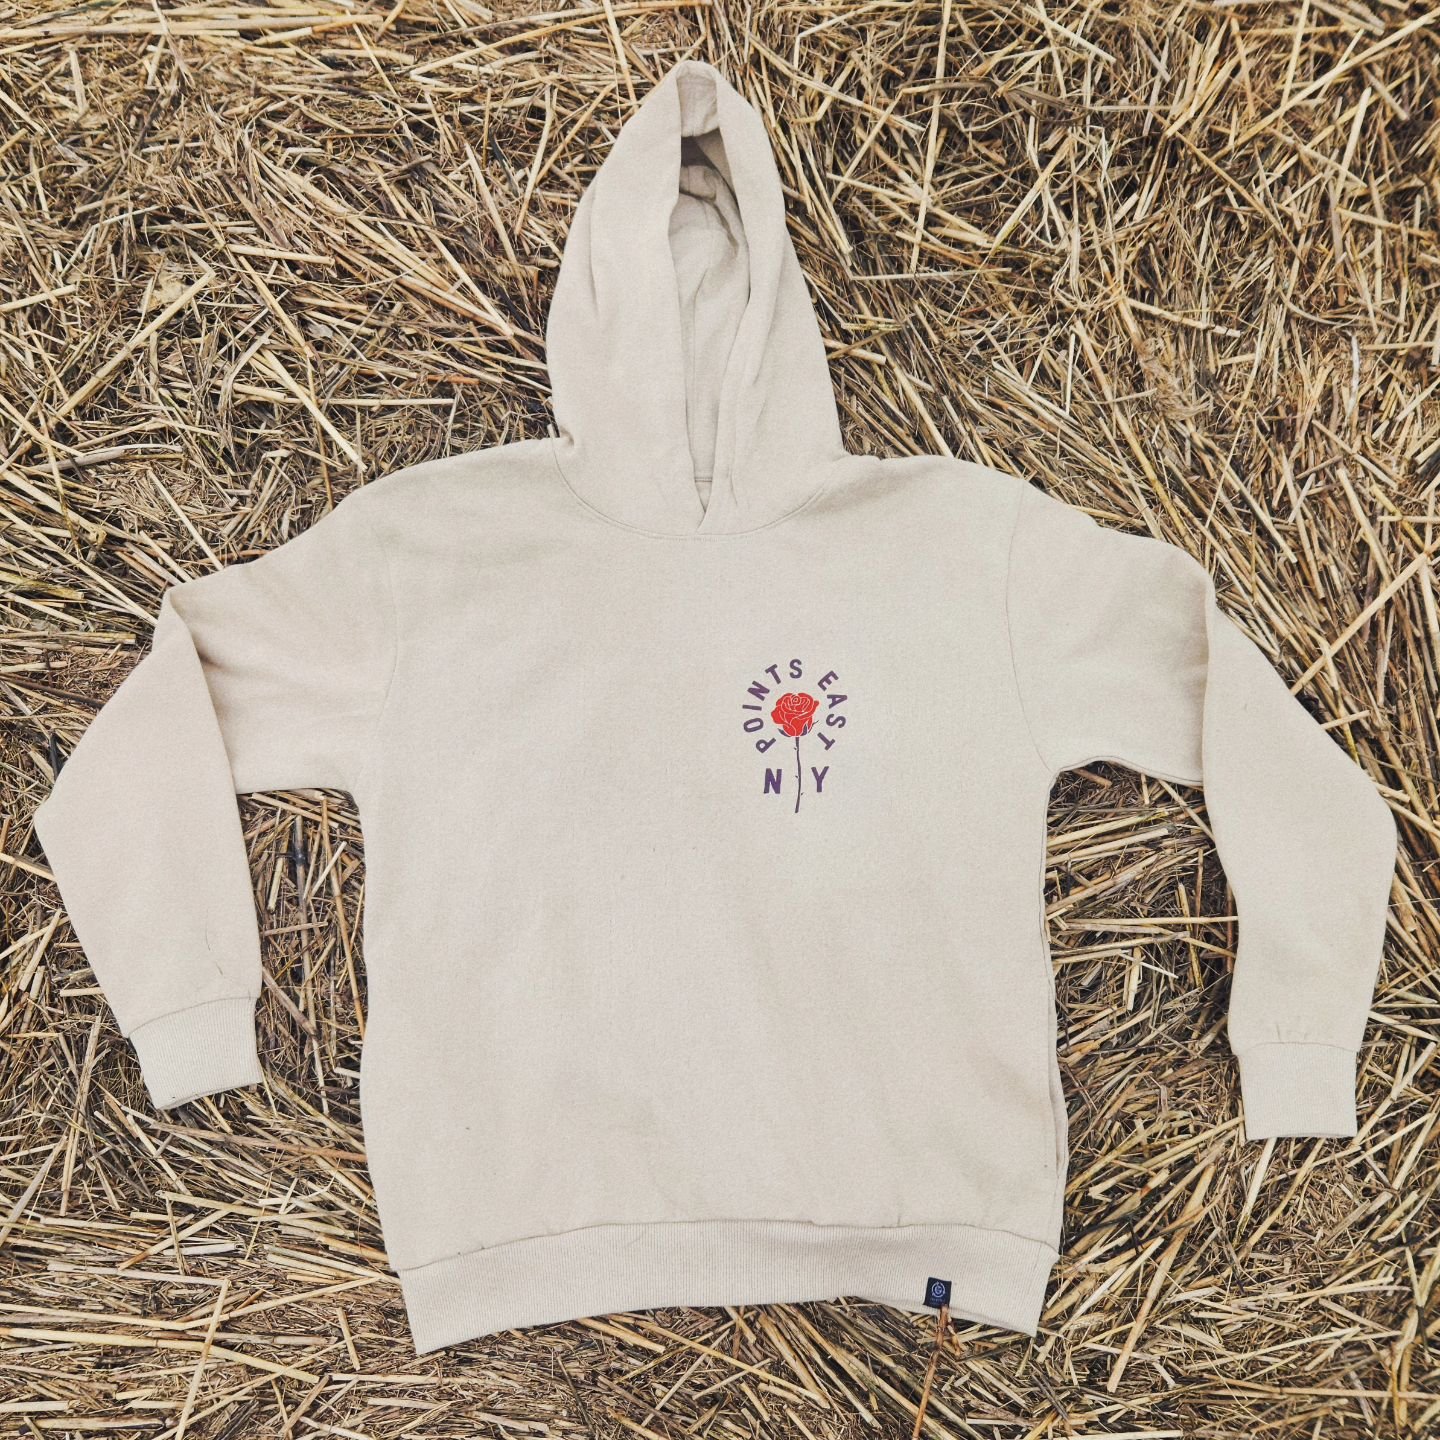 We don't make hoodies often, but when we do, we make sure they're above and beyond. The new Reclaim hoodie is made from 100% post industrial fabric and printed with reclaimed ink. Oh, the pockets? They're hidden in the side seams. Available now, but 